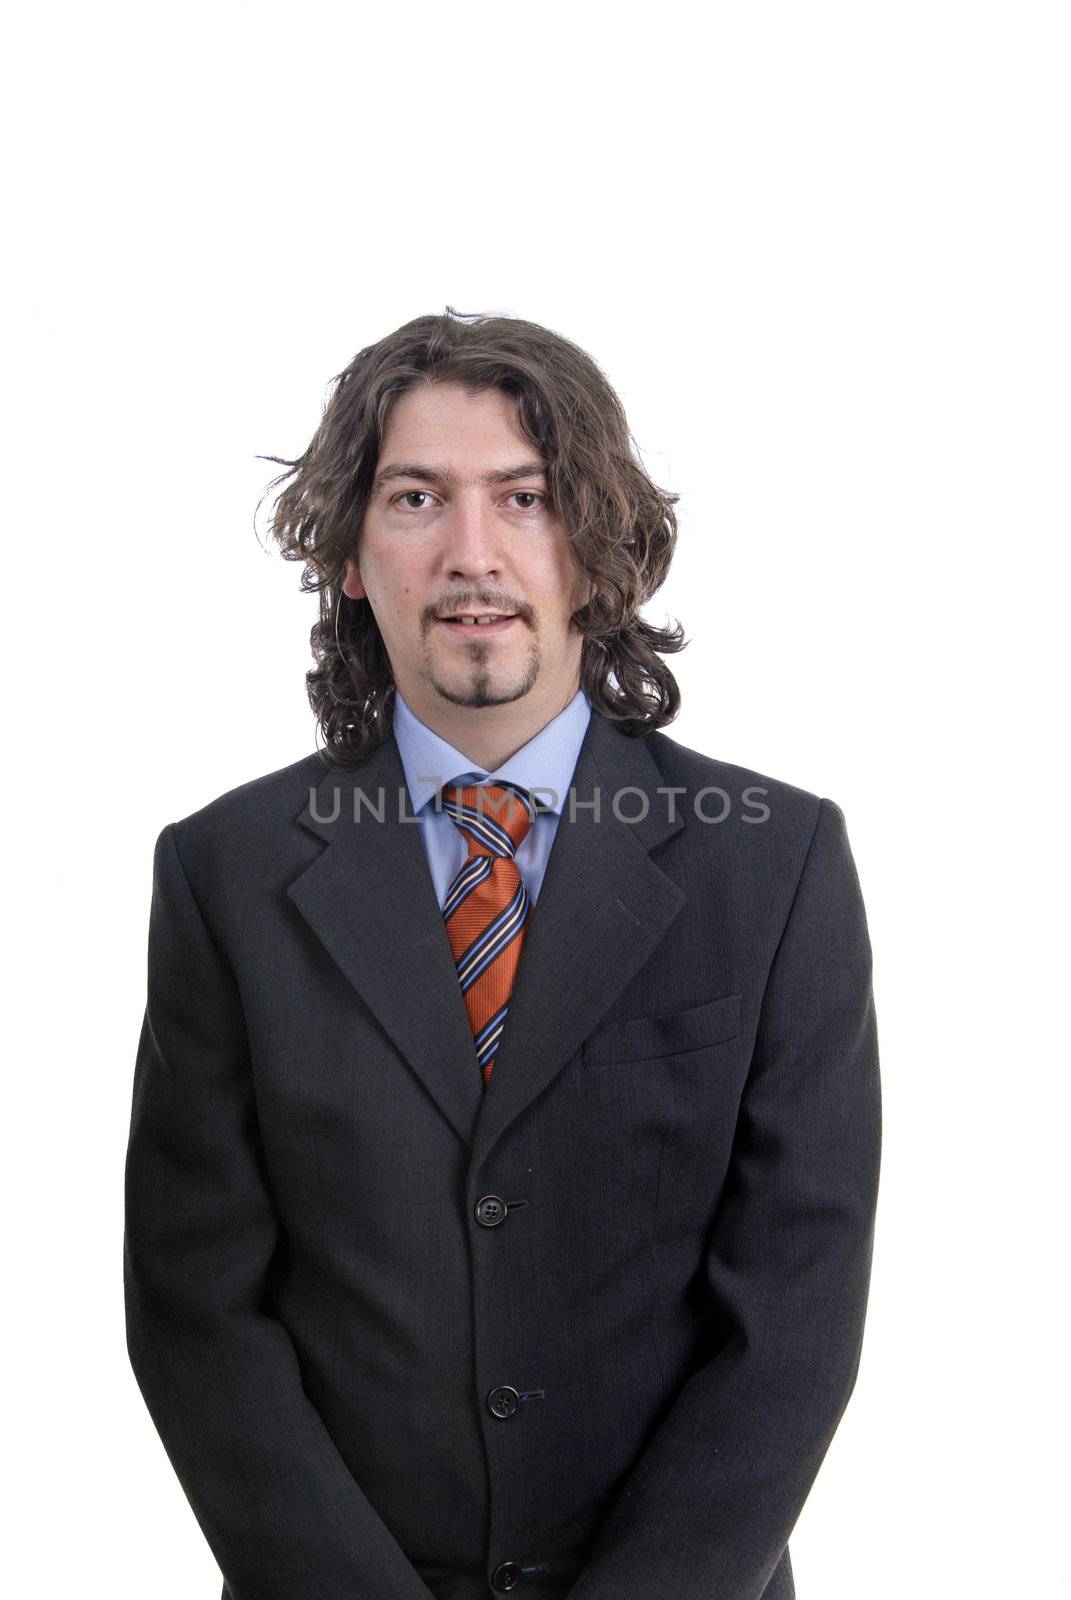 young business man standing on white background